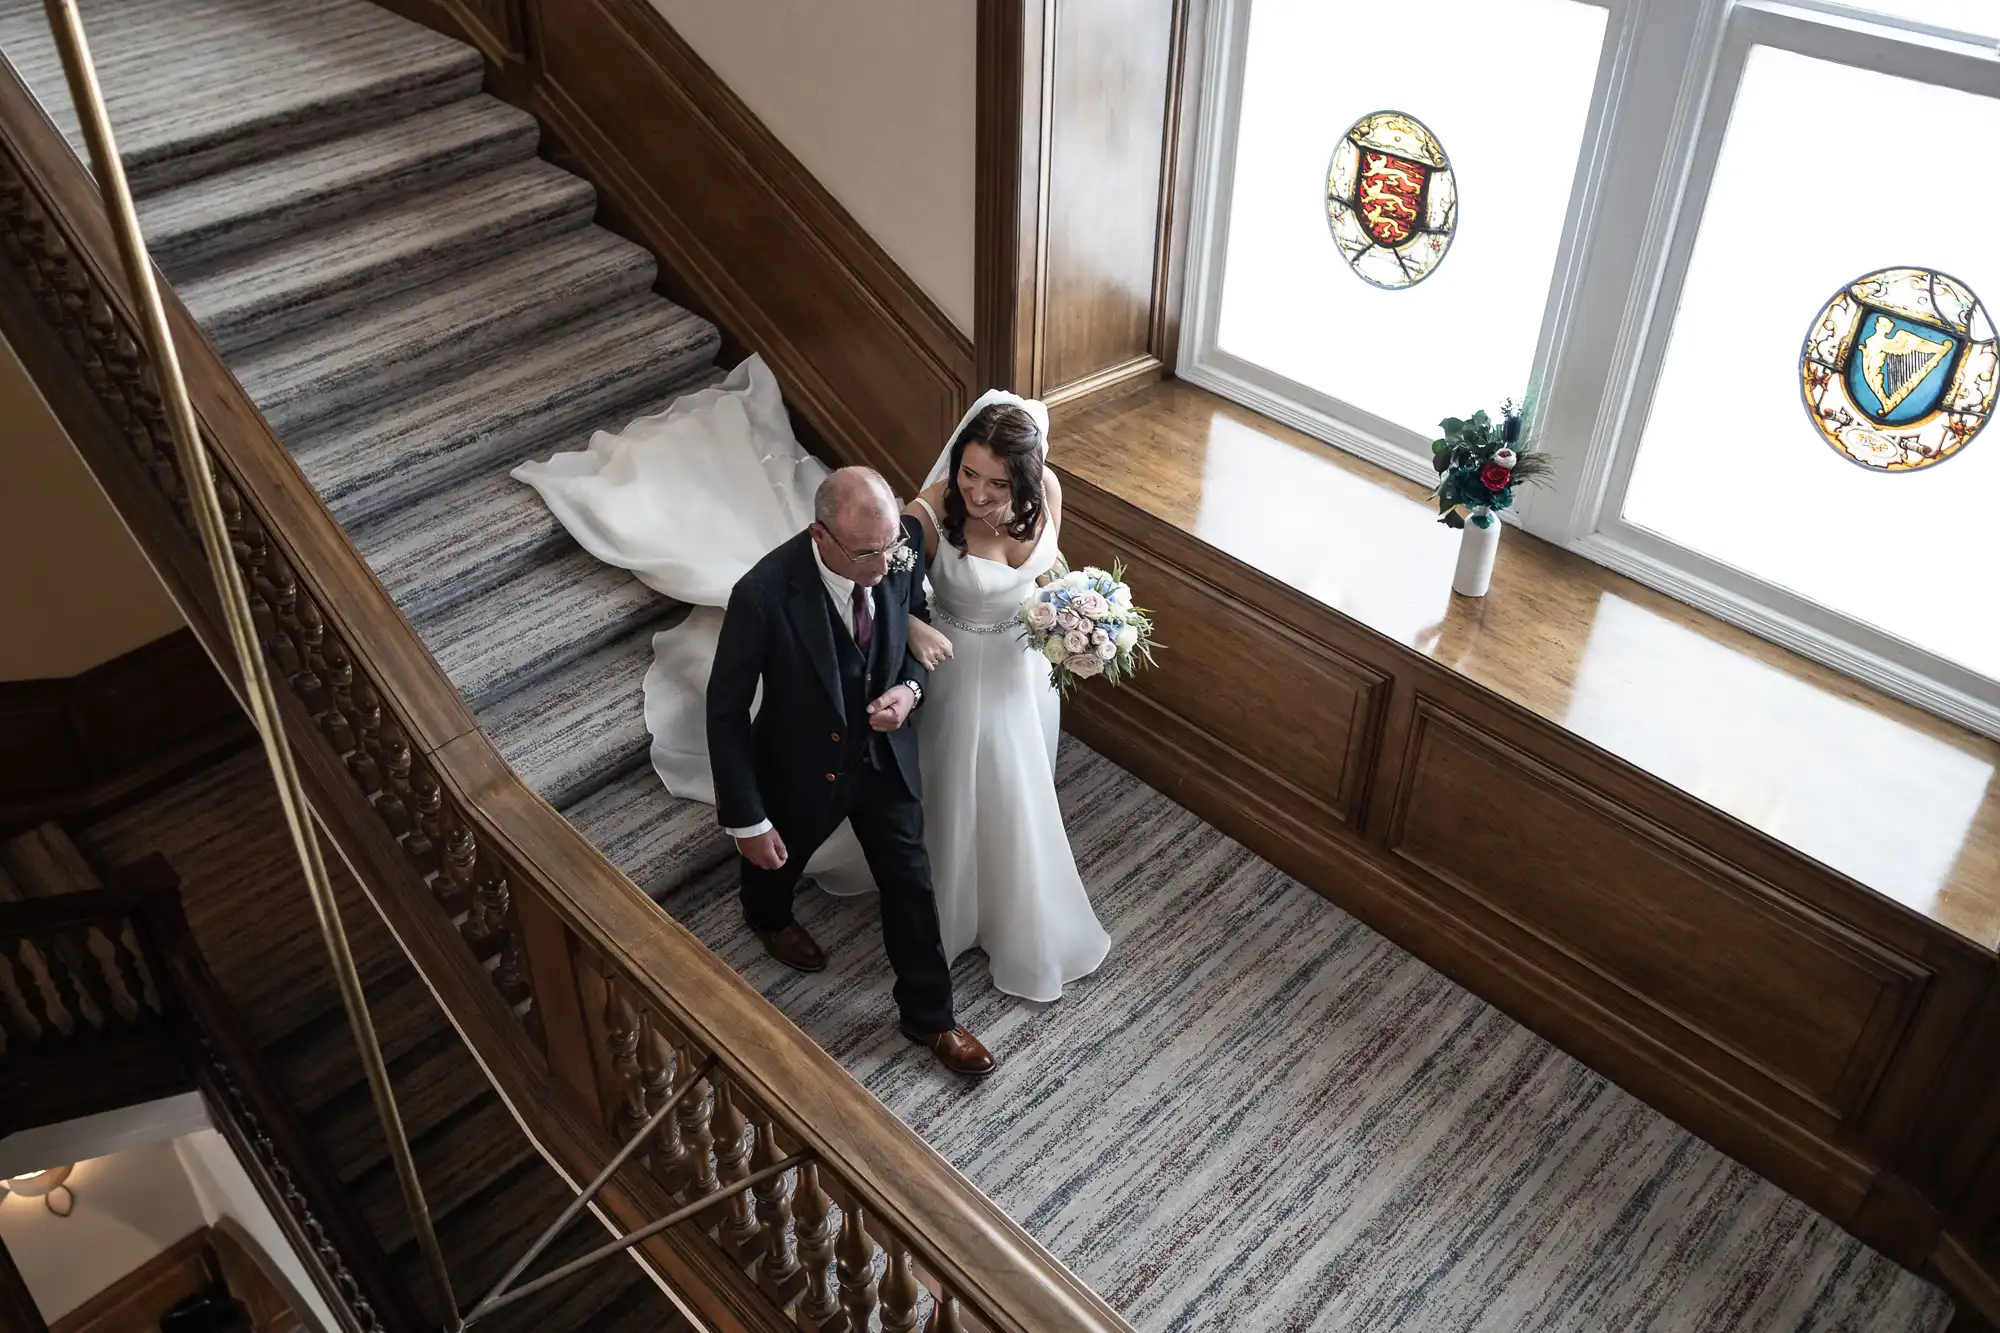 A bride and her father descend a grand staircase, beside stained glass windows, in a classic wedding scene.